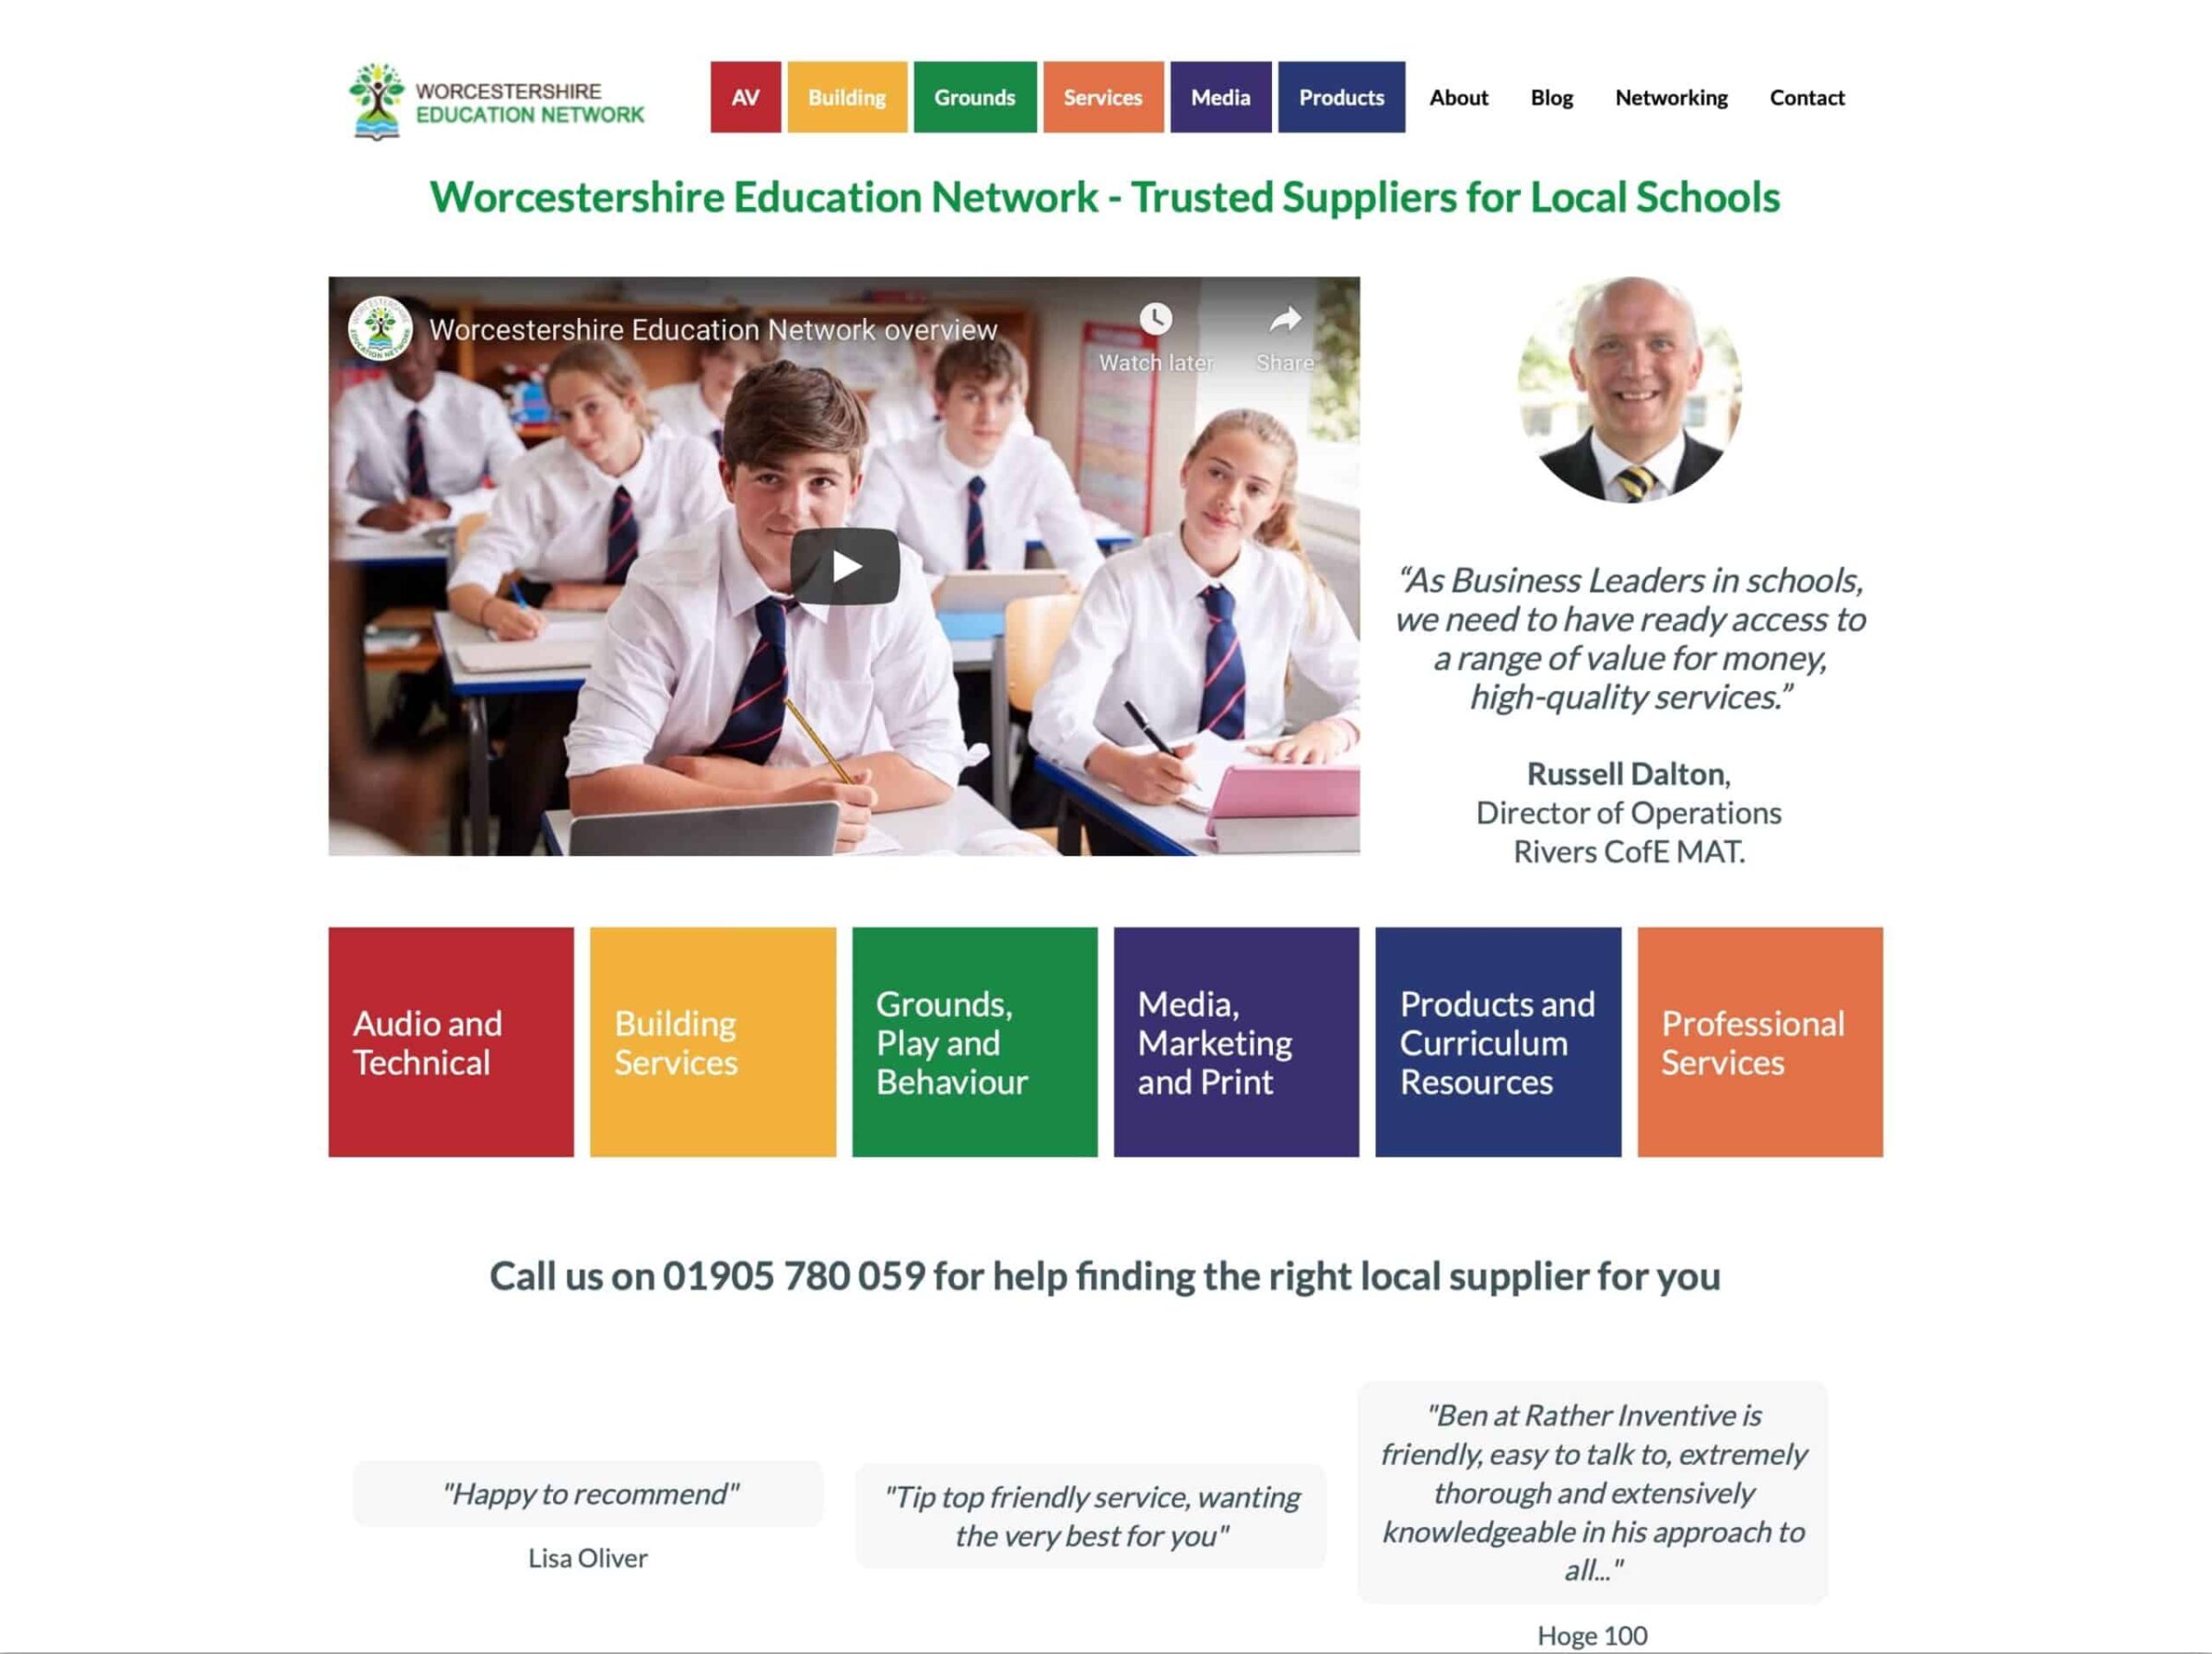 The Education Network website worcestershireeducationnetwork.co.uk